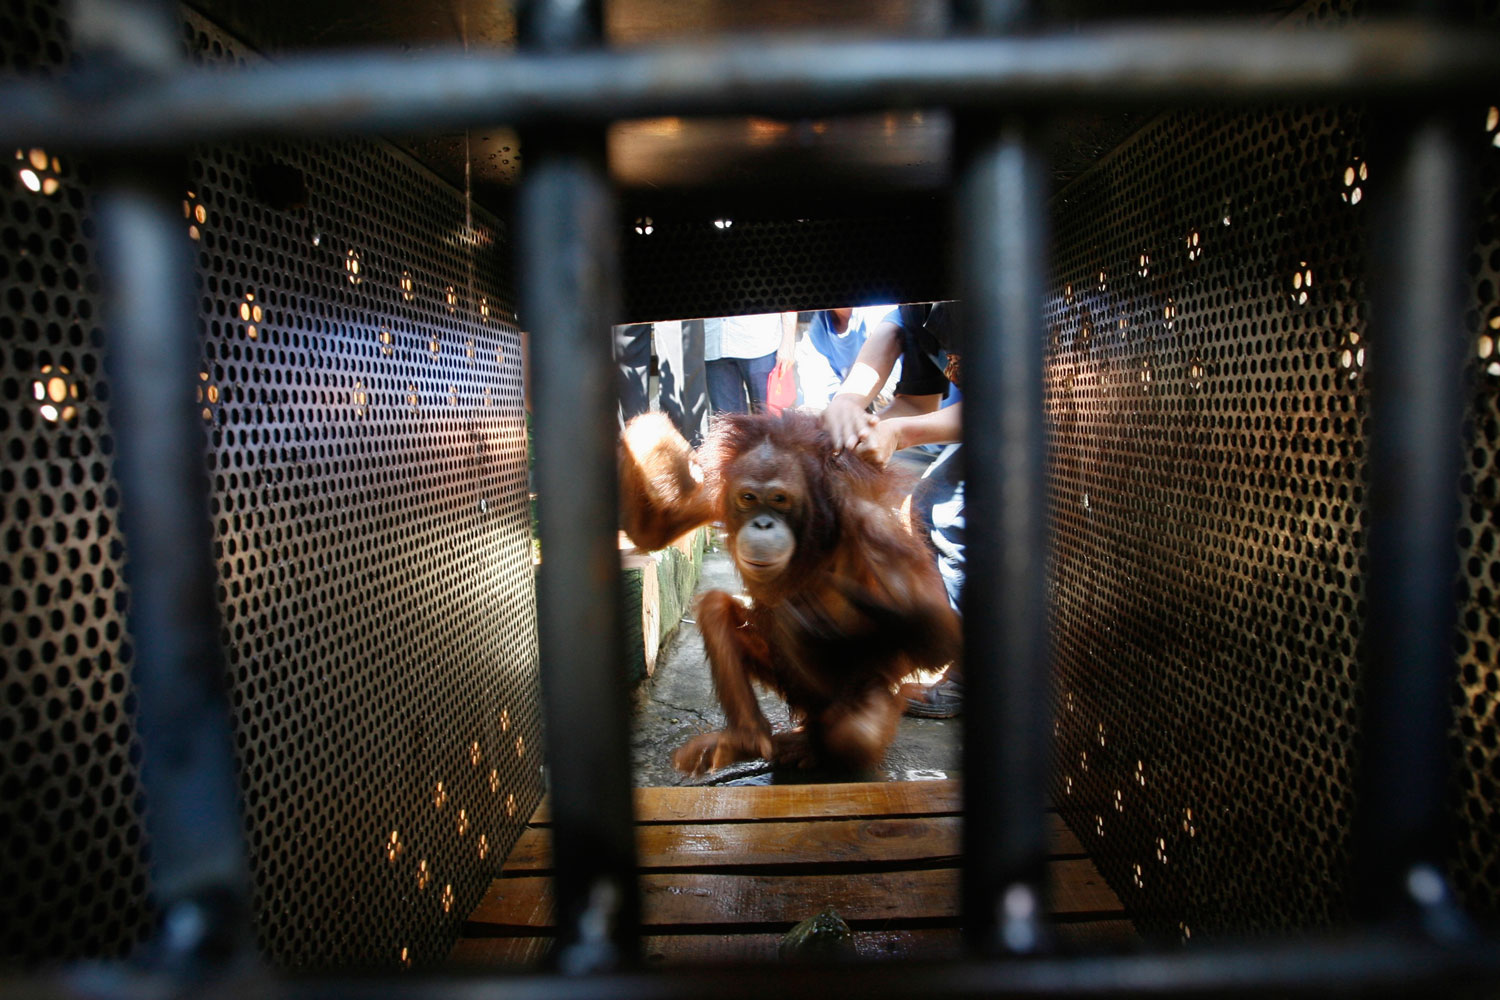 A female orangutan gets into a cage after being rescued in Pasuruan, East Java, on July 10, 2012. (Sigit Pamungkas—Reuters)